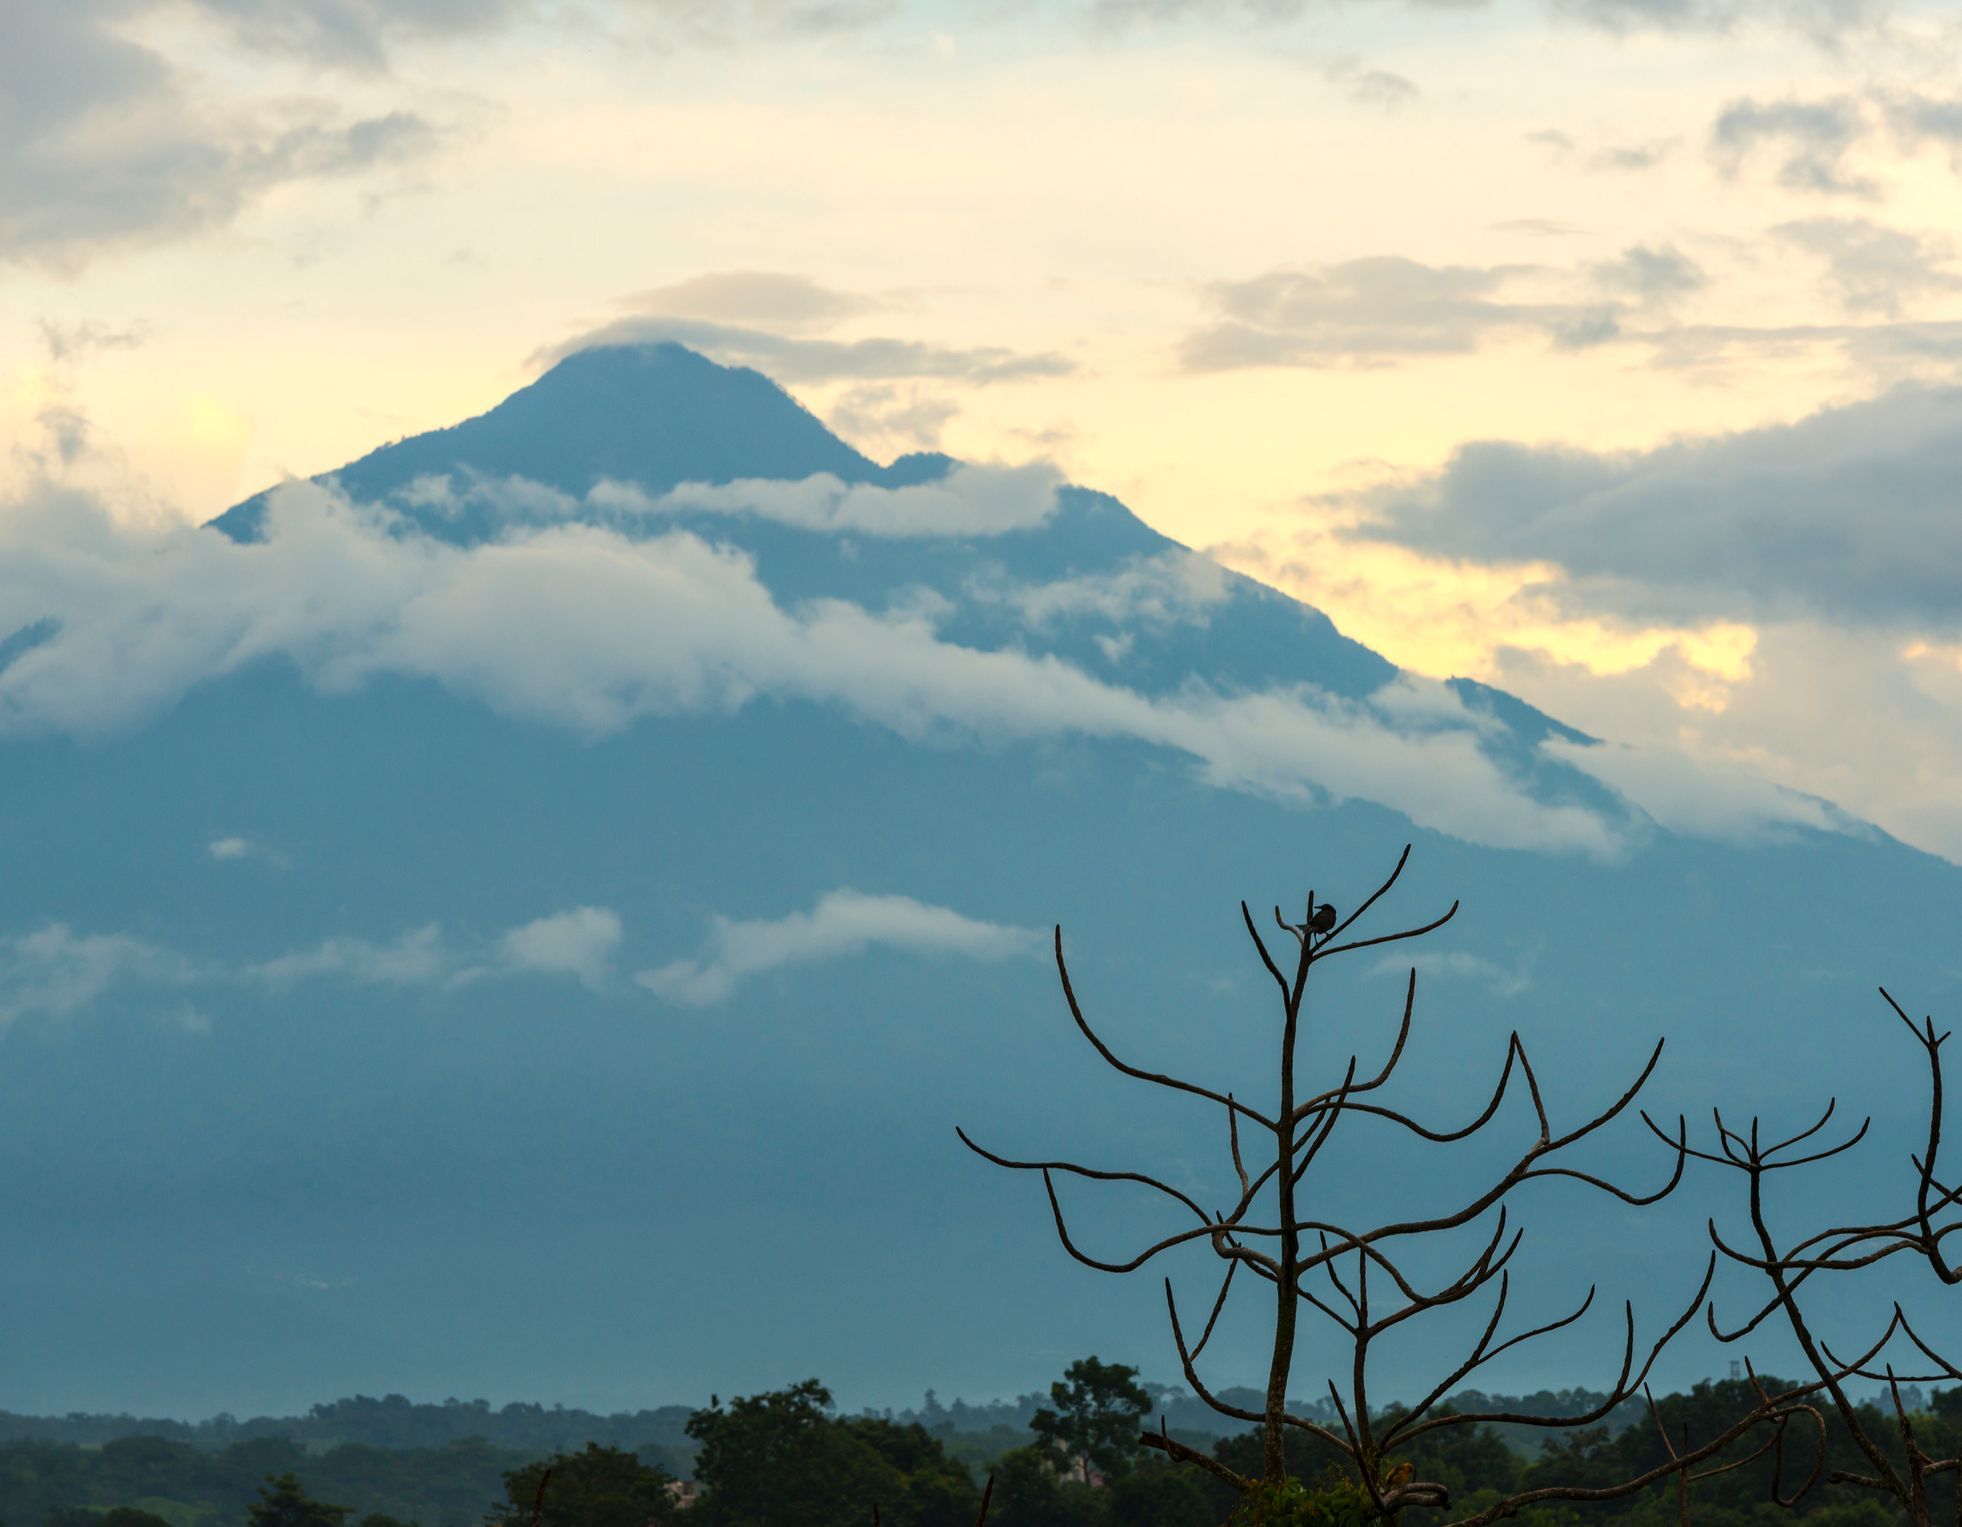 Mount Tajumulco, the highest point in Central America, seen at dawn surrounded by clouds. Photo: Getty.